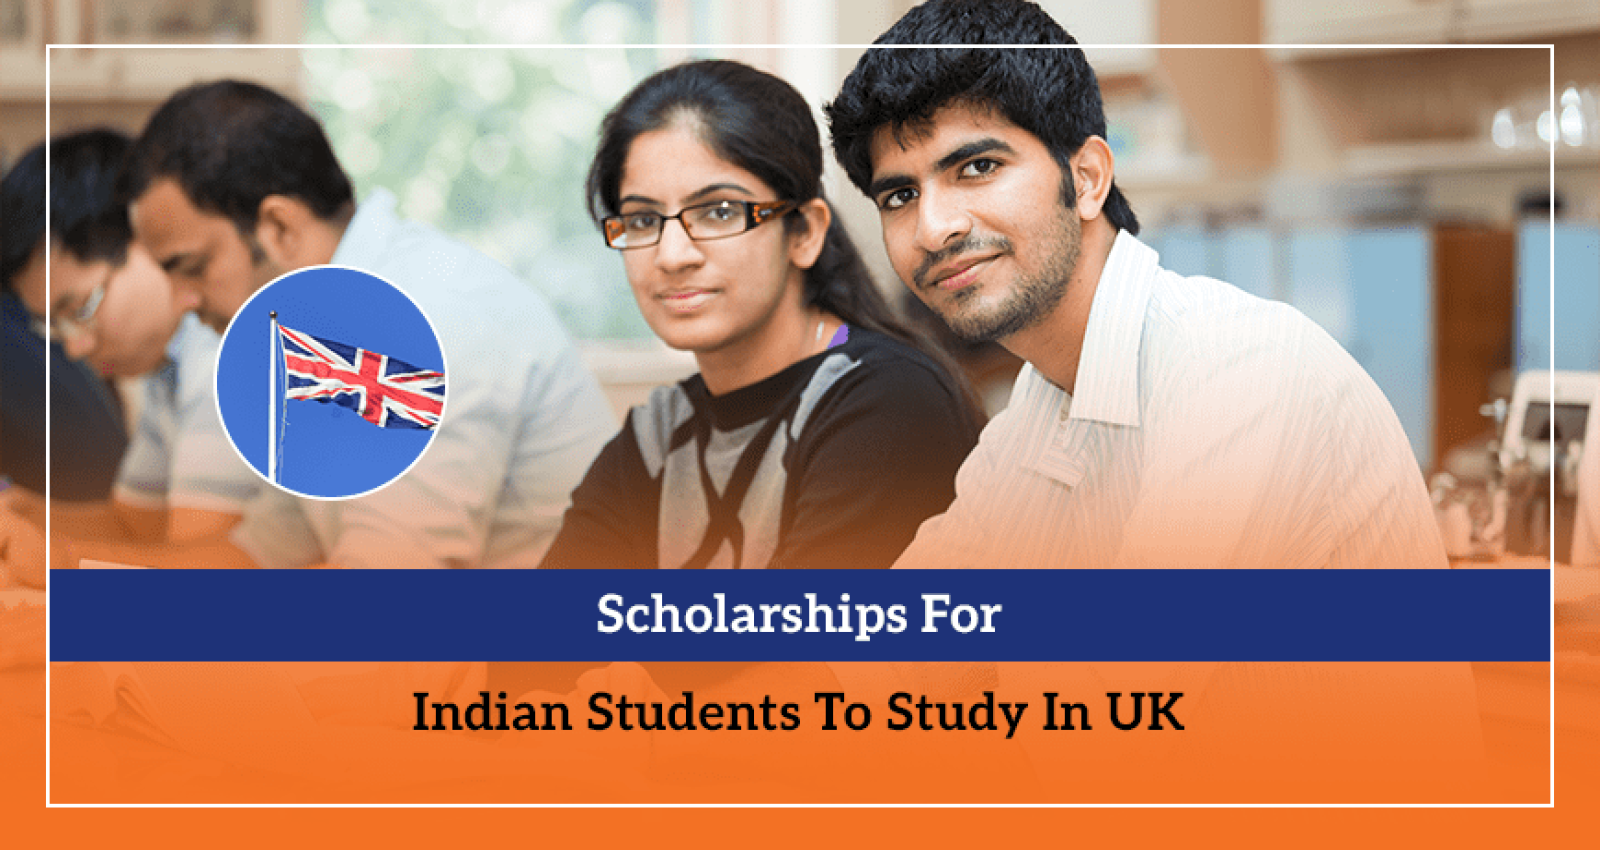 Scholarships For Indian Students To Study In UK